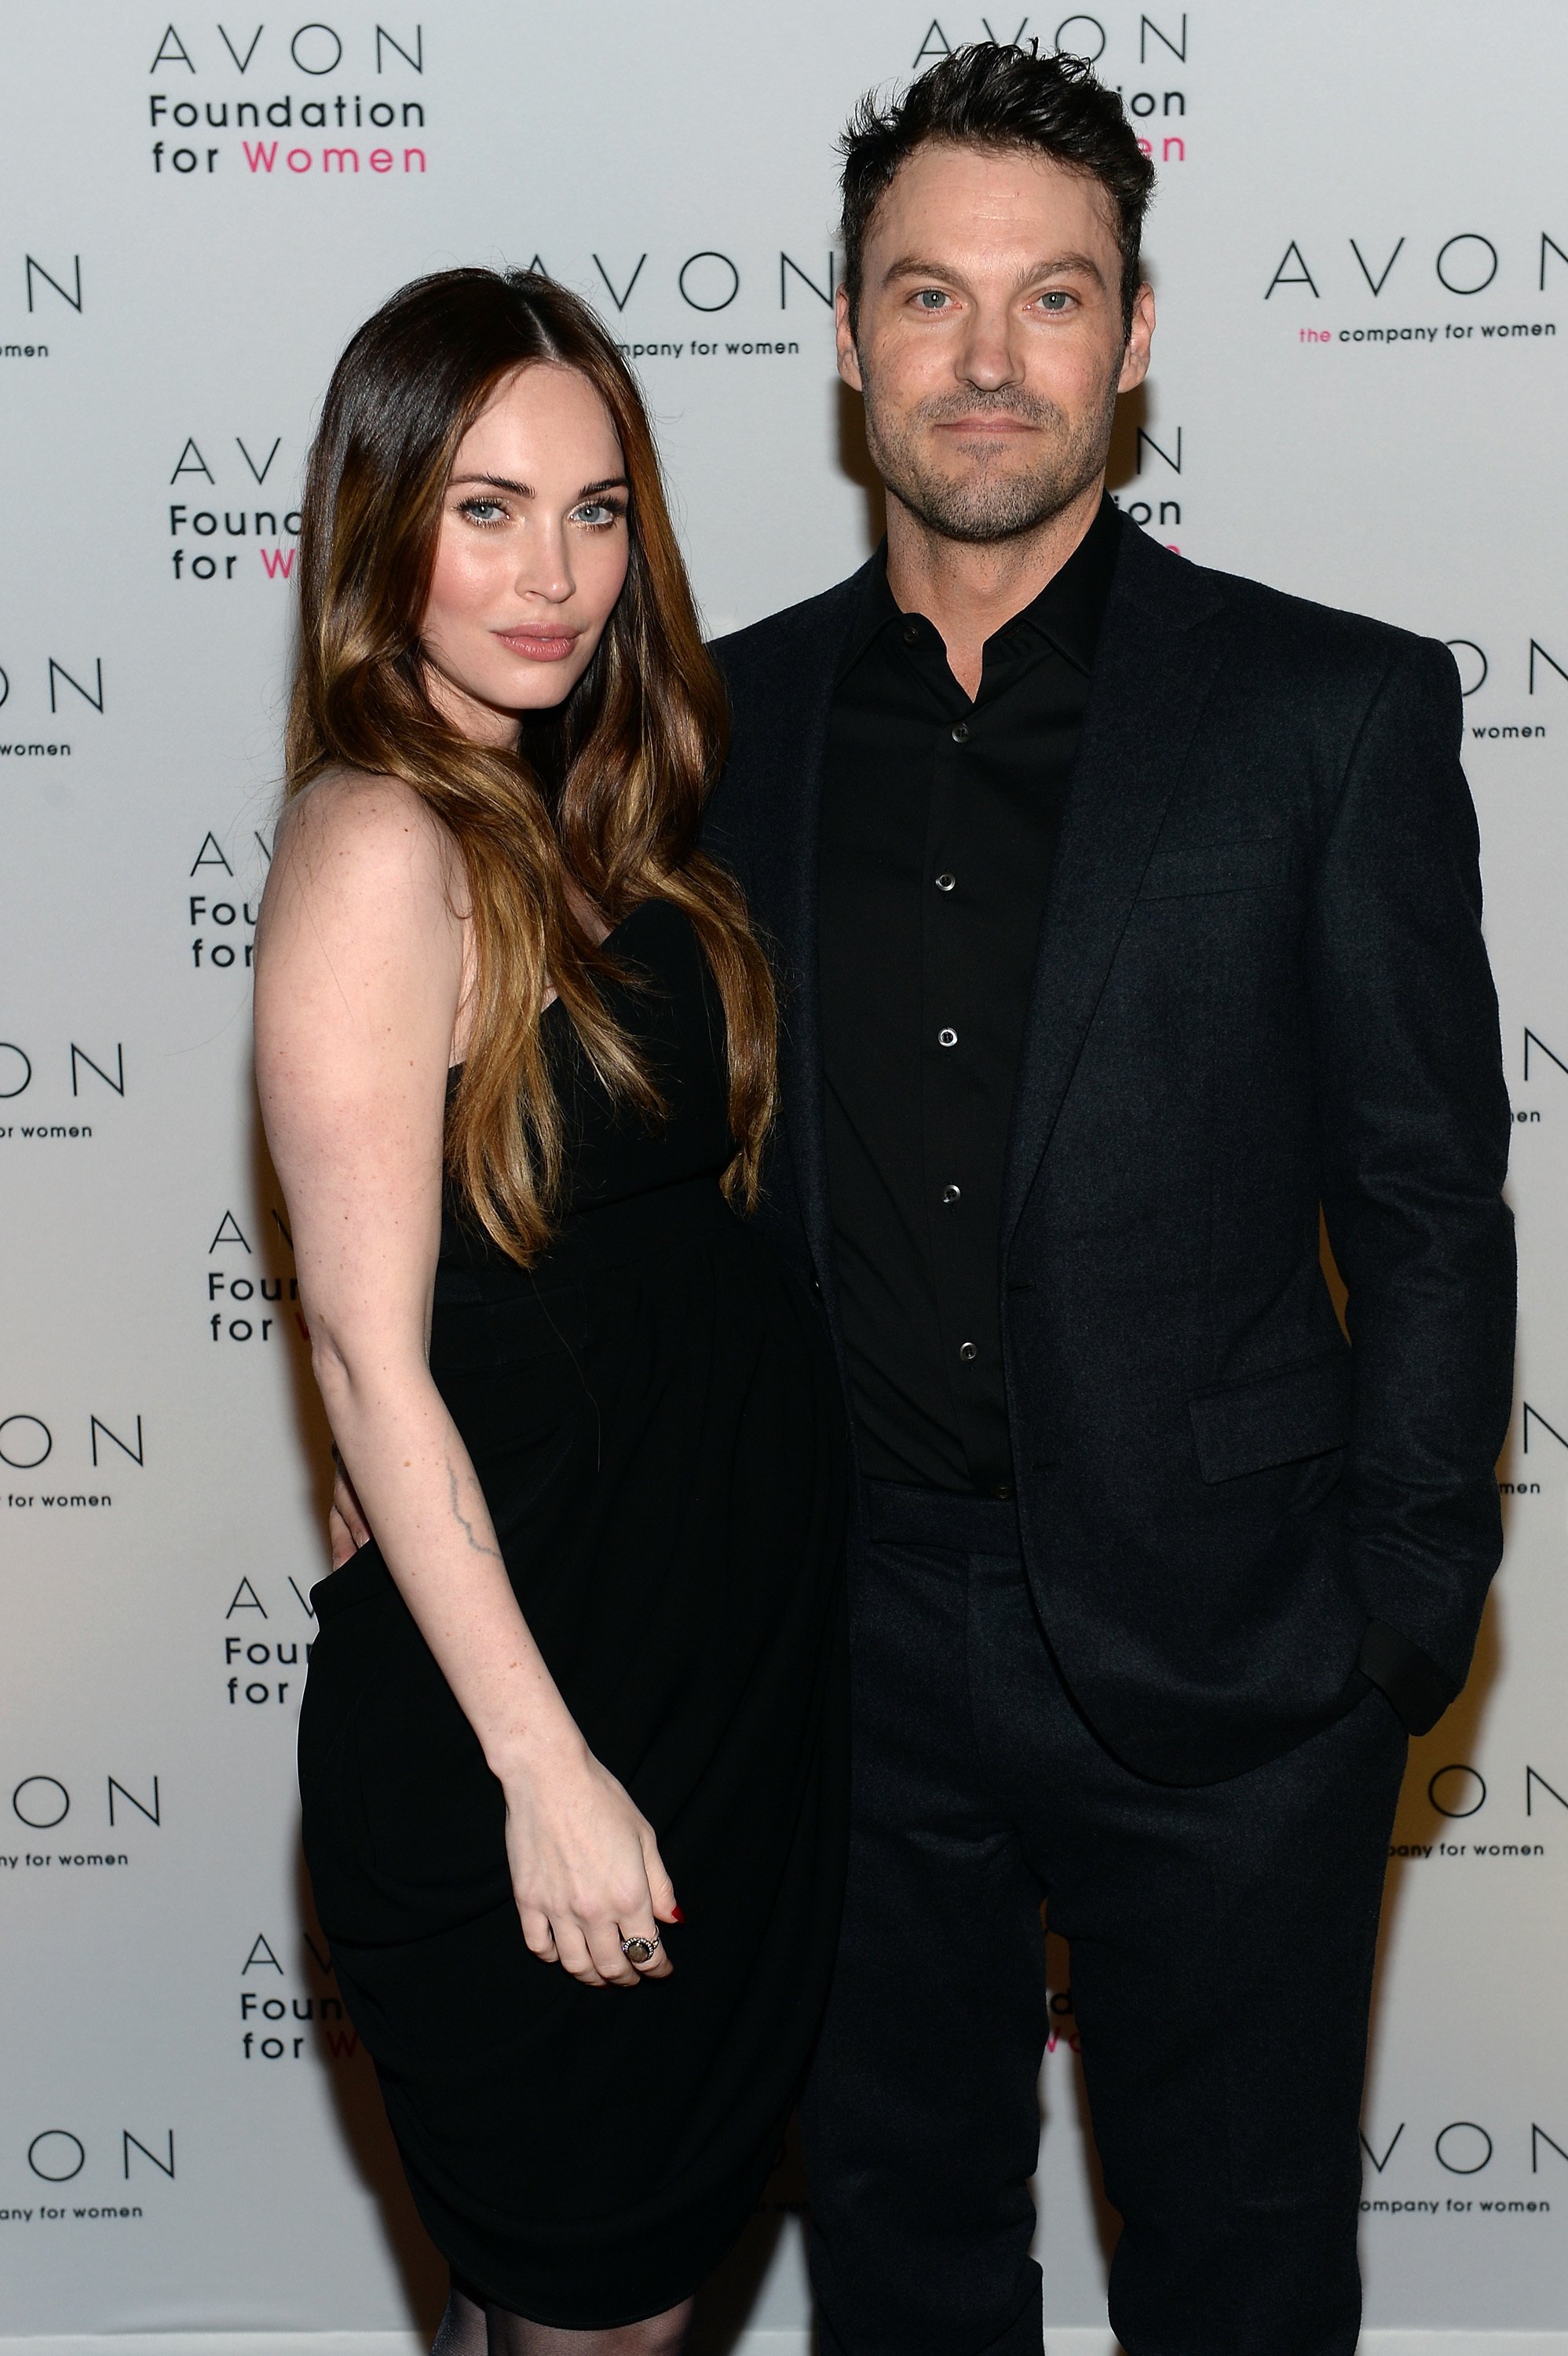 Megan Fox and Brian Austin Green at The Morgan Library & Museum in New York City | Photo: Getty Images